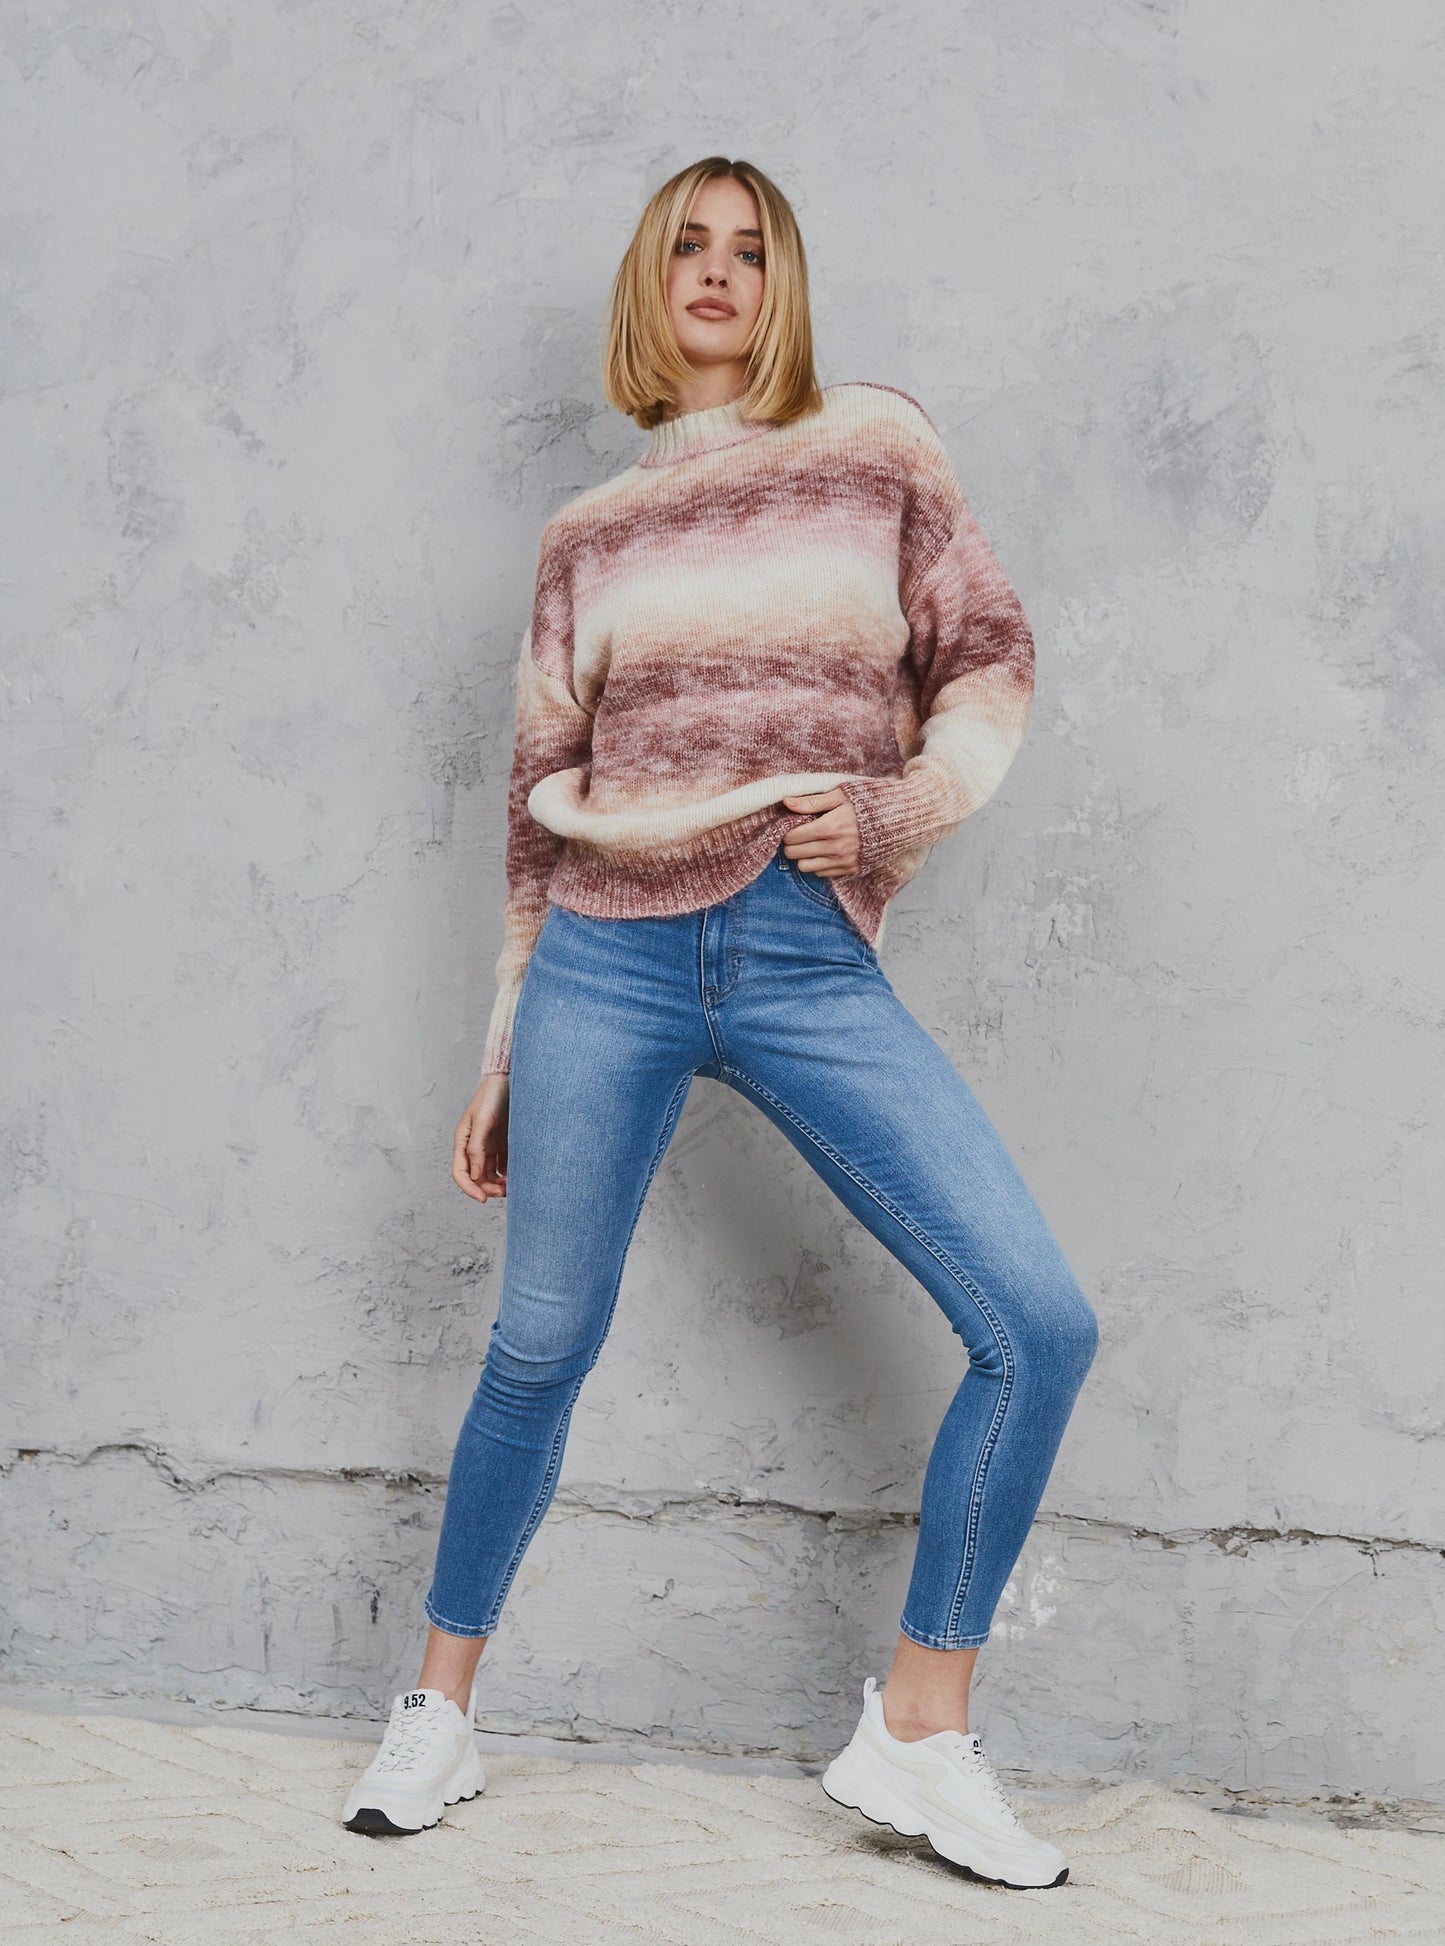 Freyer Ombre Knit  Taupe & Bone